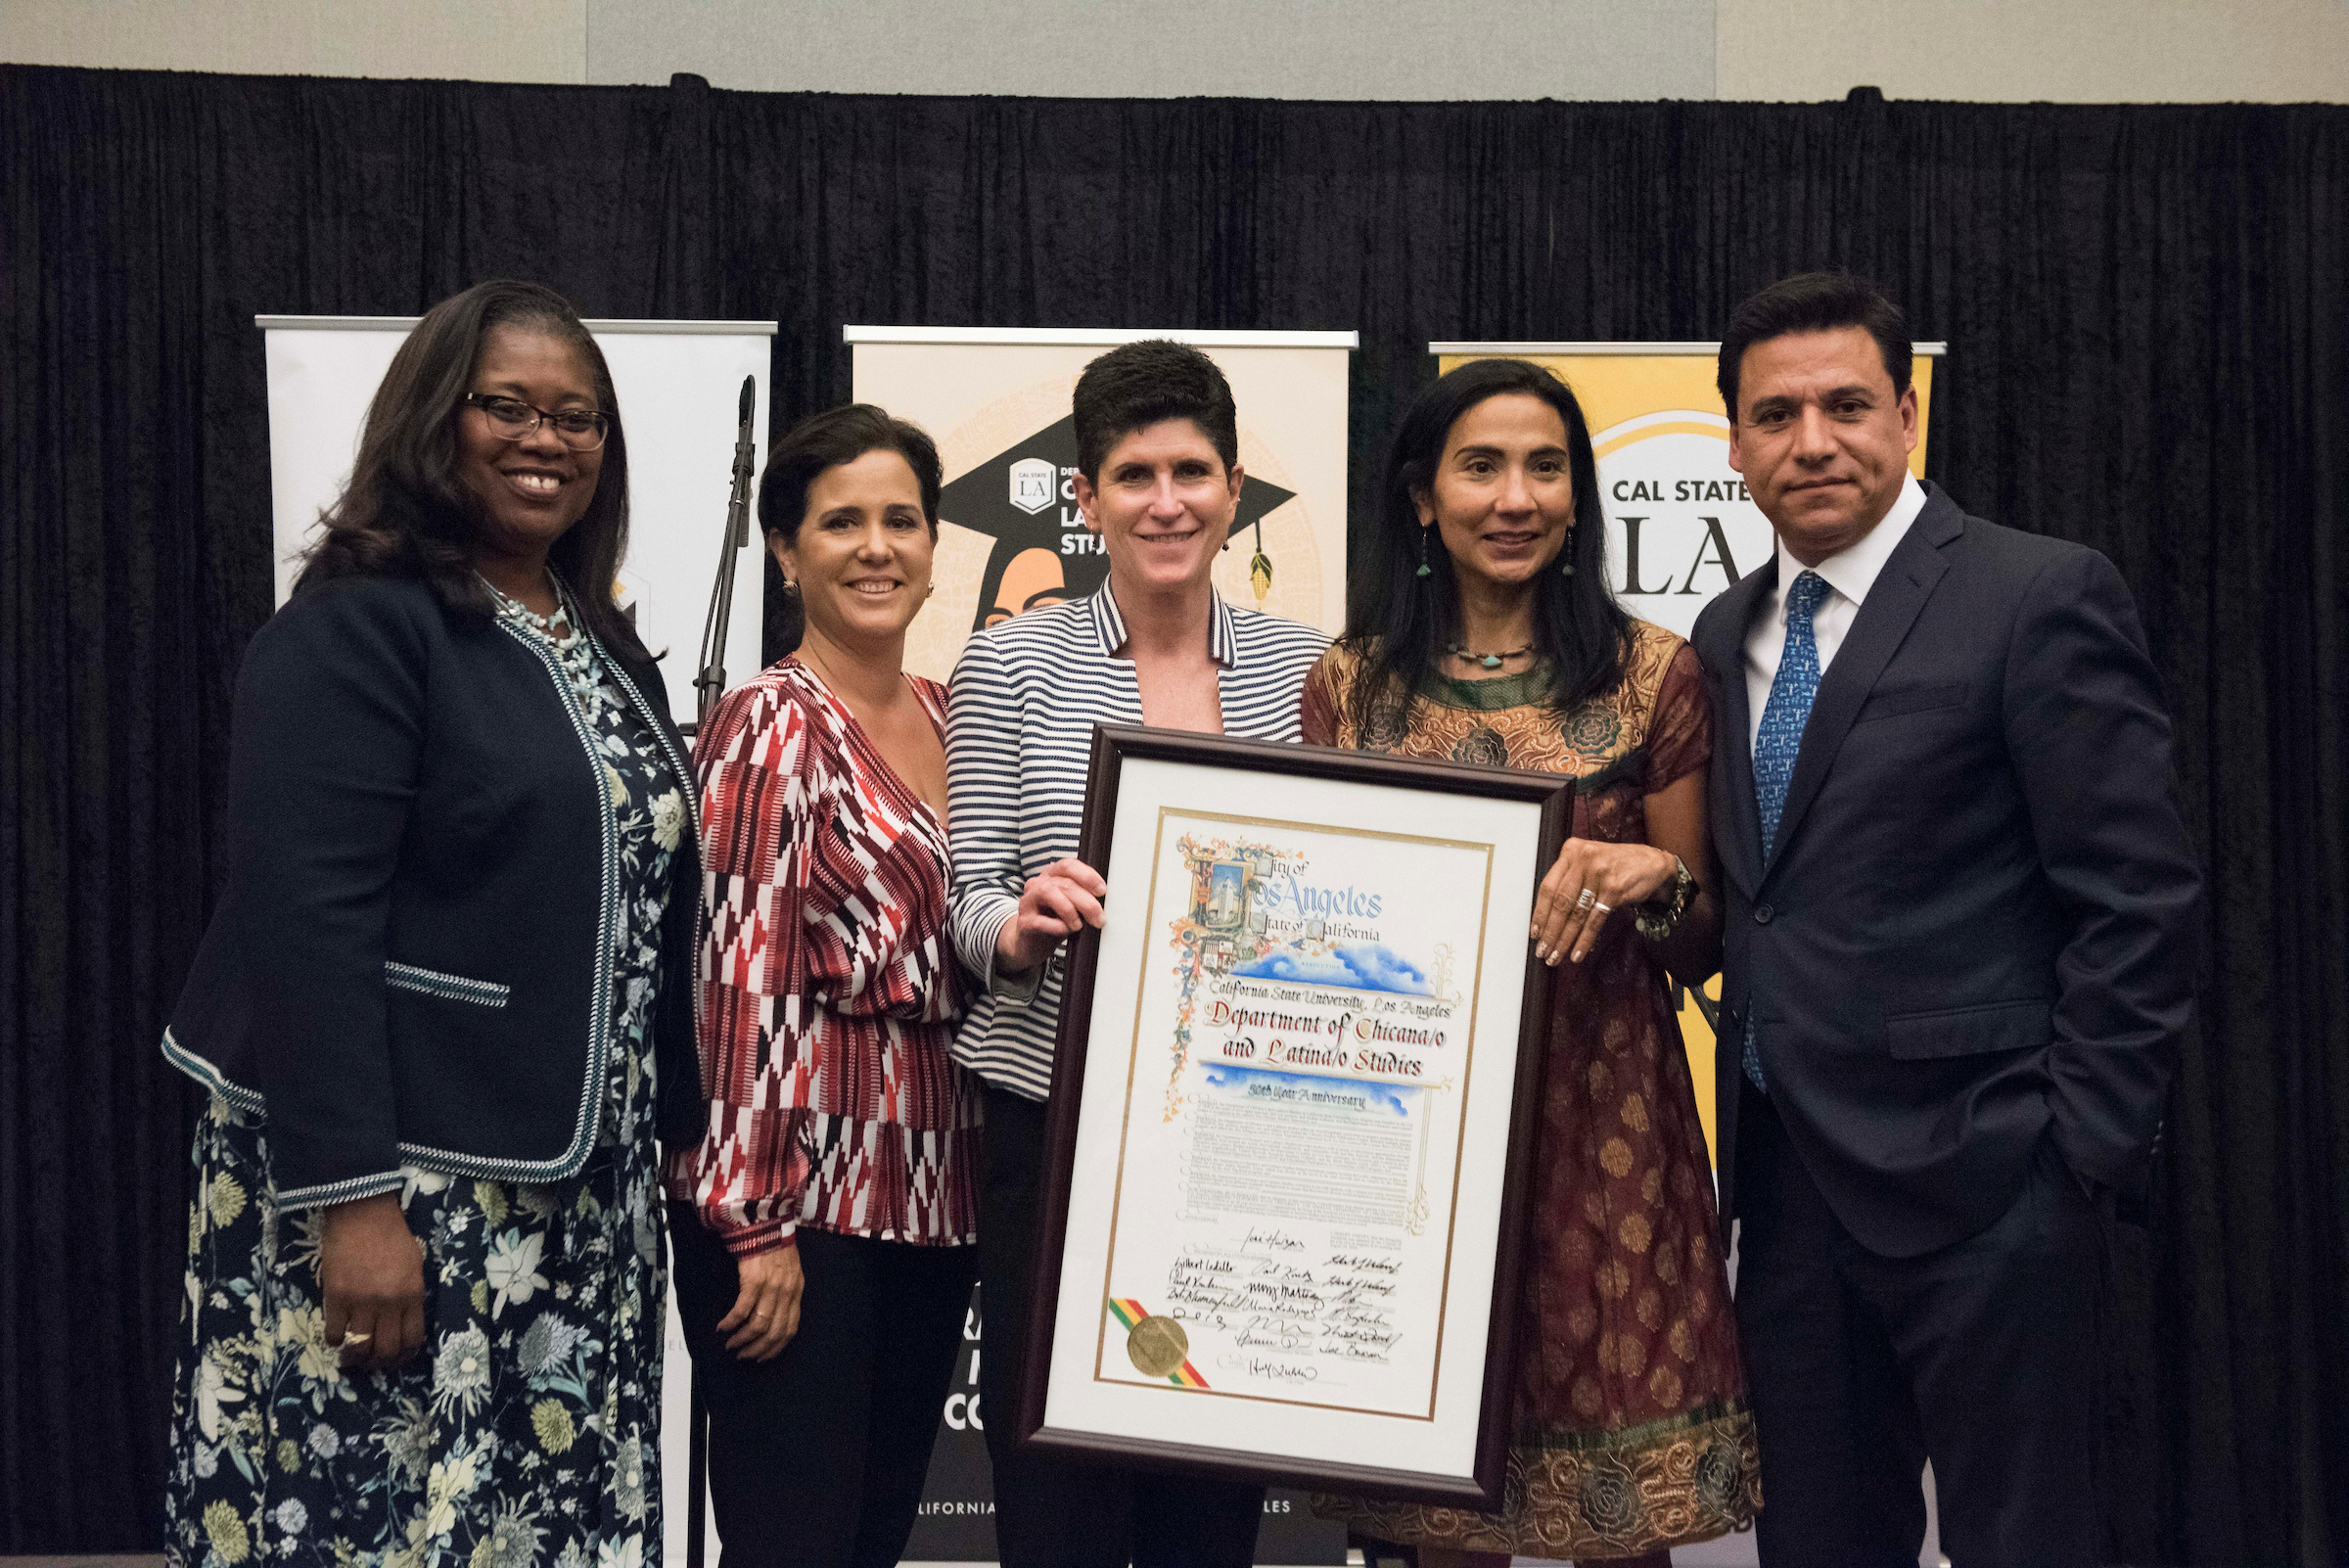 College of Natural and Social Sciences Dean Pamela Scott-Johnson, Commissioner Richelle Huizar, Provost and Vice President for Academic Affairs Lynn Mahoney, Deptartment of Chicana(o) and Latina(o) Studies Chair Dolores Delgado Bernal, and L.A. City Counc